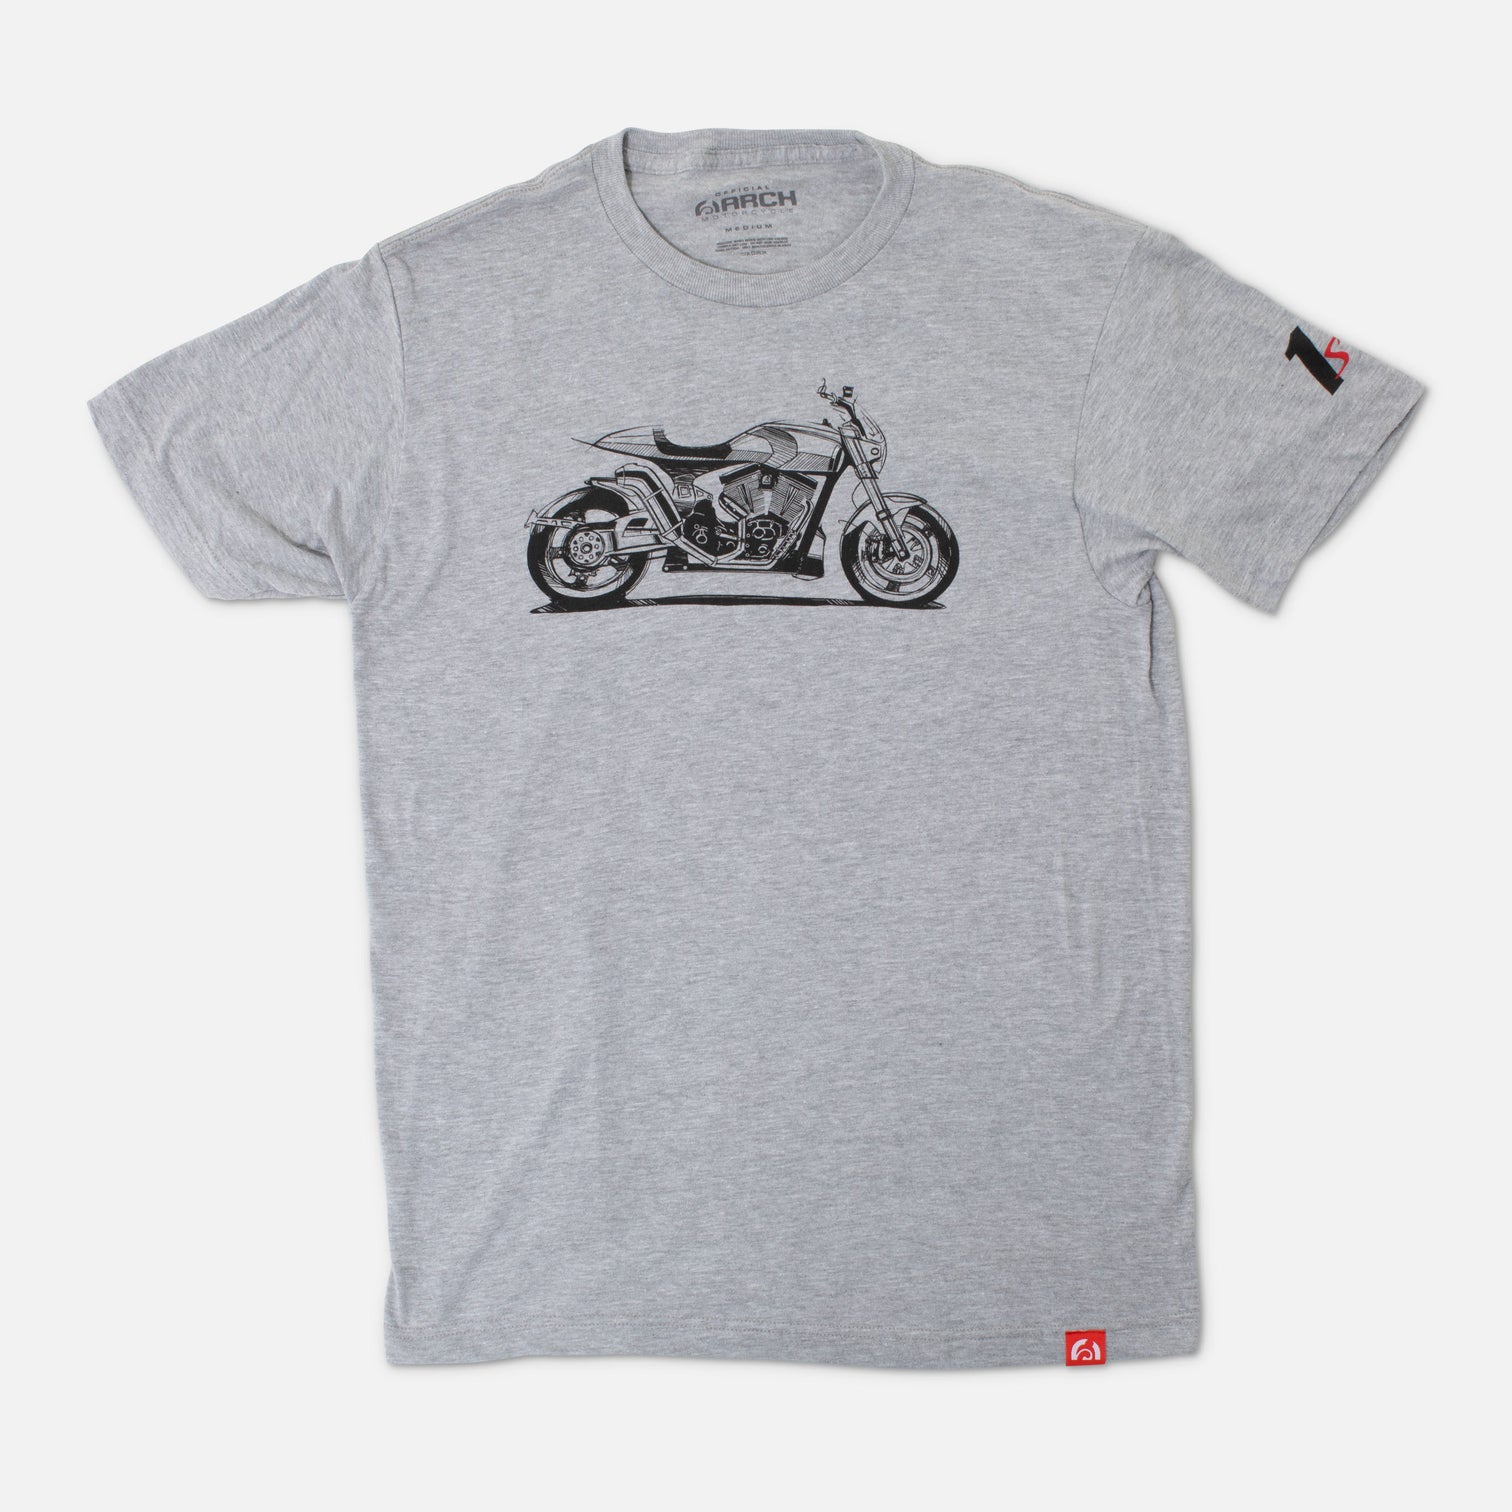 ARCH Motorcycle 1s T-Shirt – ARCH Motorcycle Company, LLC